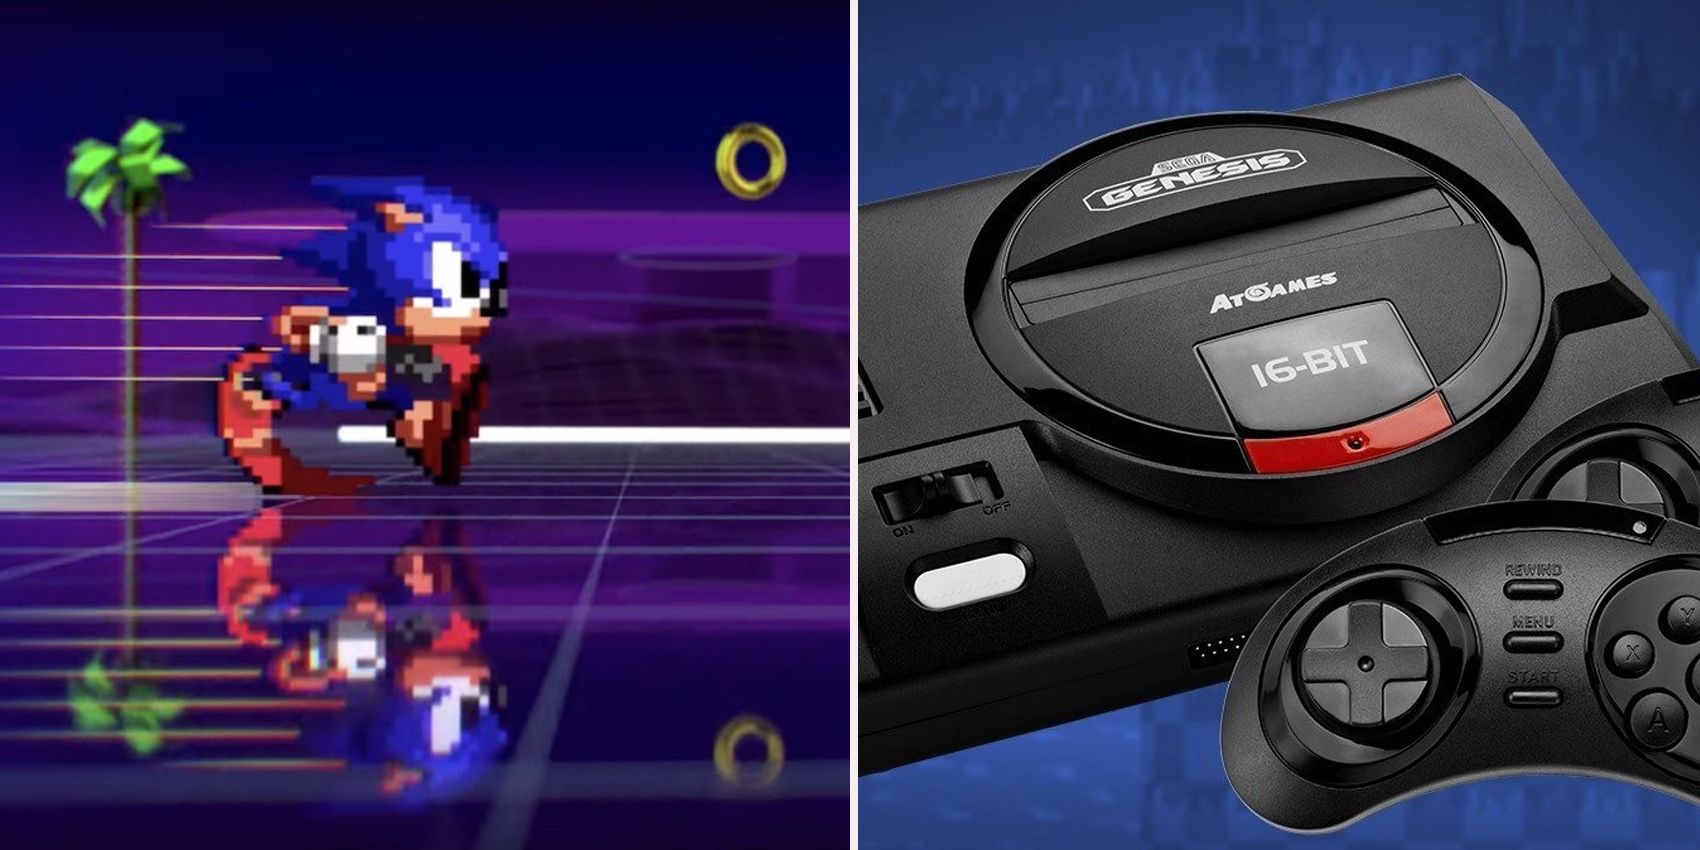 This handheld console lets you play the classic Sega cartridges